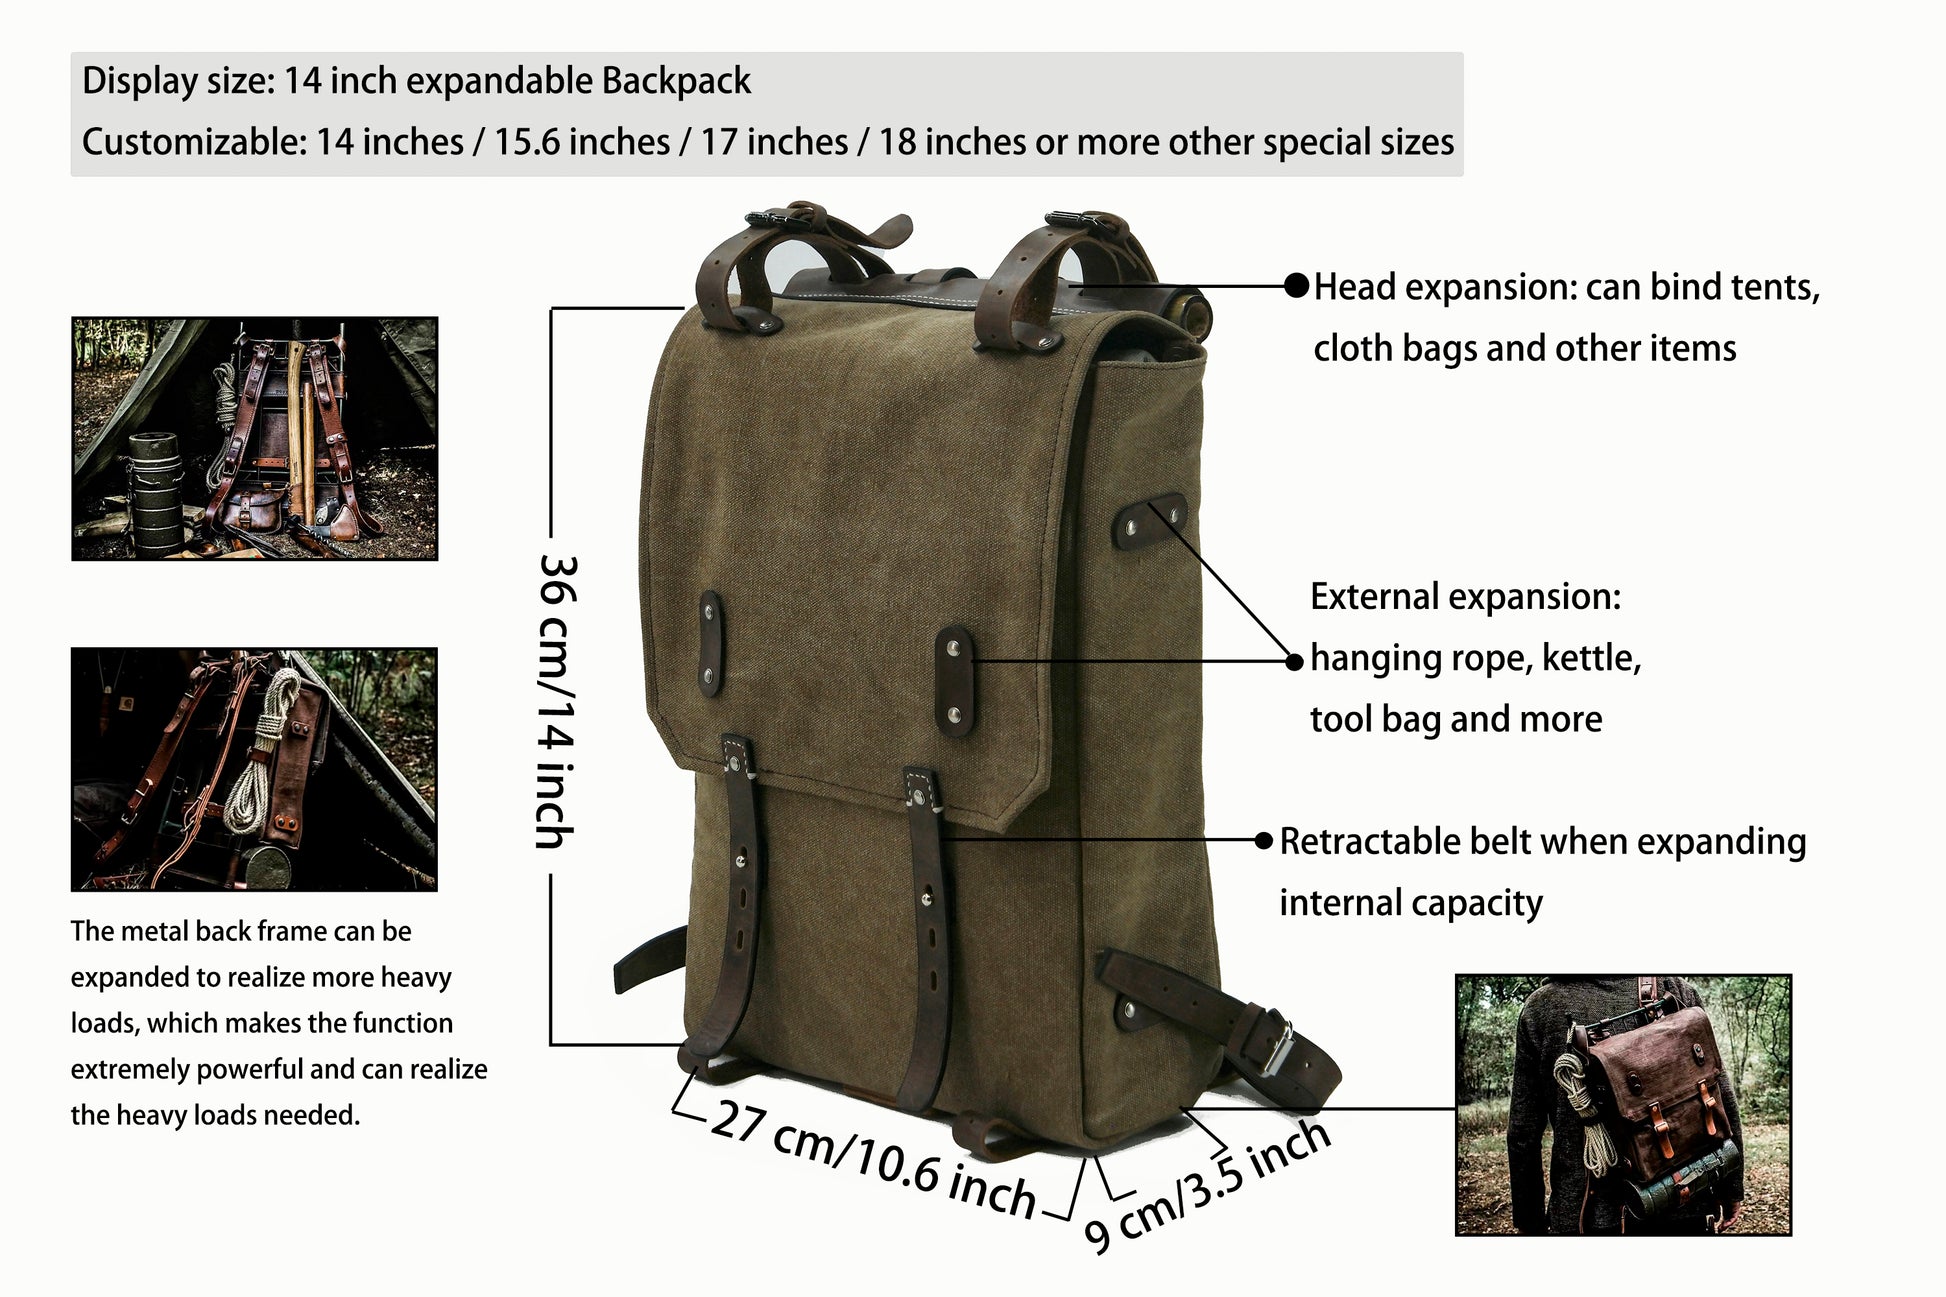 Leather Canvas Backpack for hiking, camping and camping that can expand the hanging and binding of goods